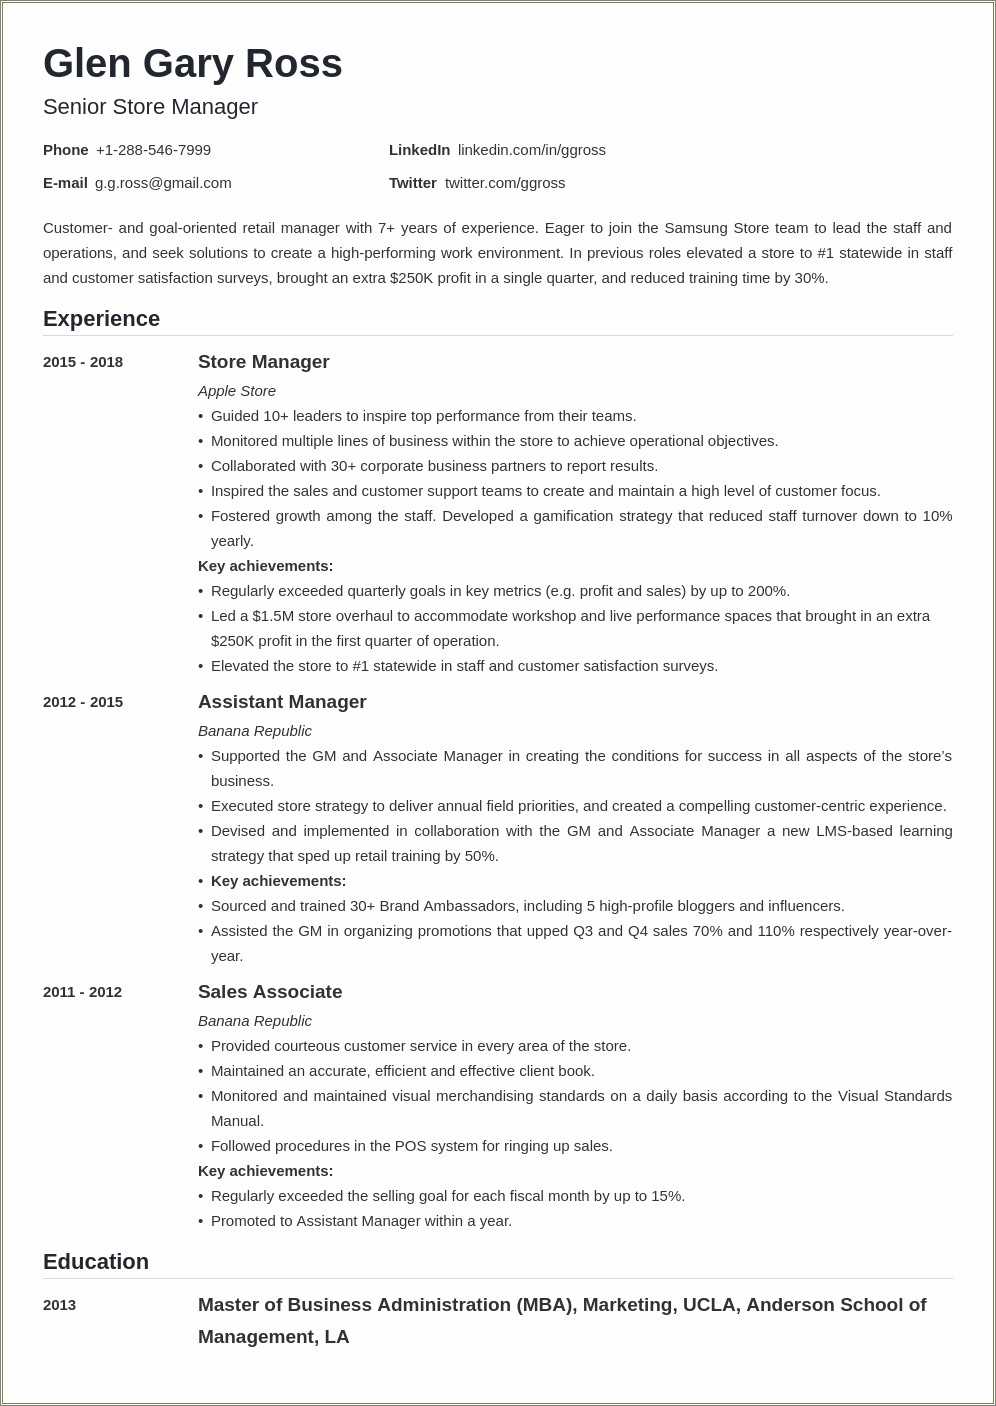 Example Of Work Resume Work Experience Customer Service